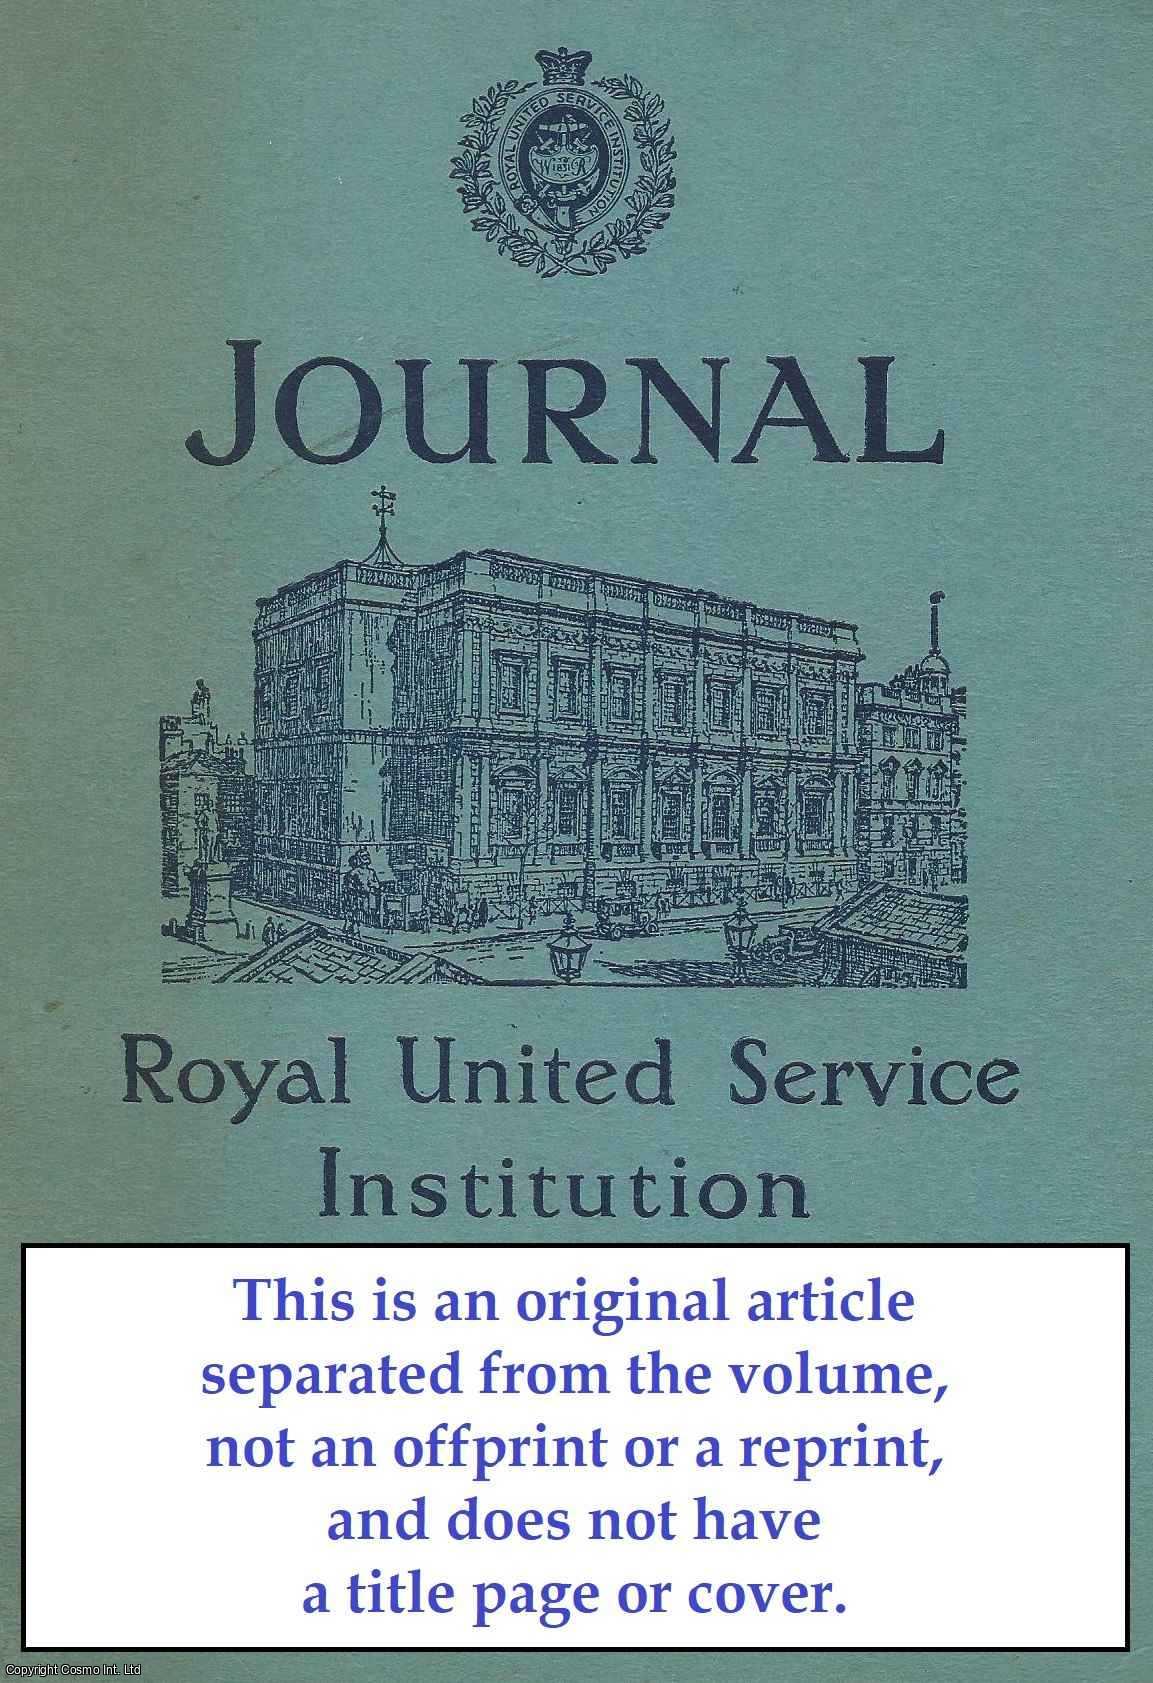 S. E. M. Goodall - Military Engineering Today: The Role of The Royal Engineers. An original article from The Journal of The Royal United Services Institute for Defence Studies, 1972.